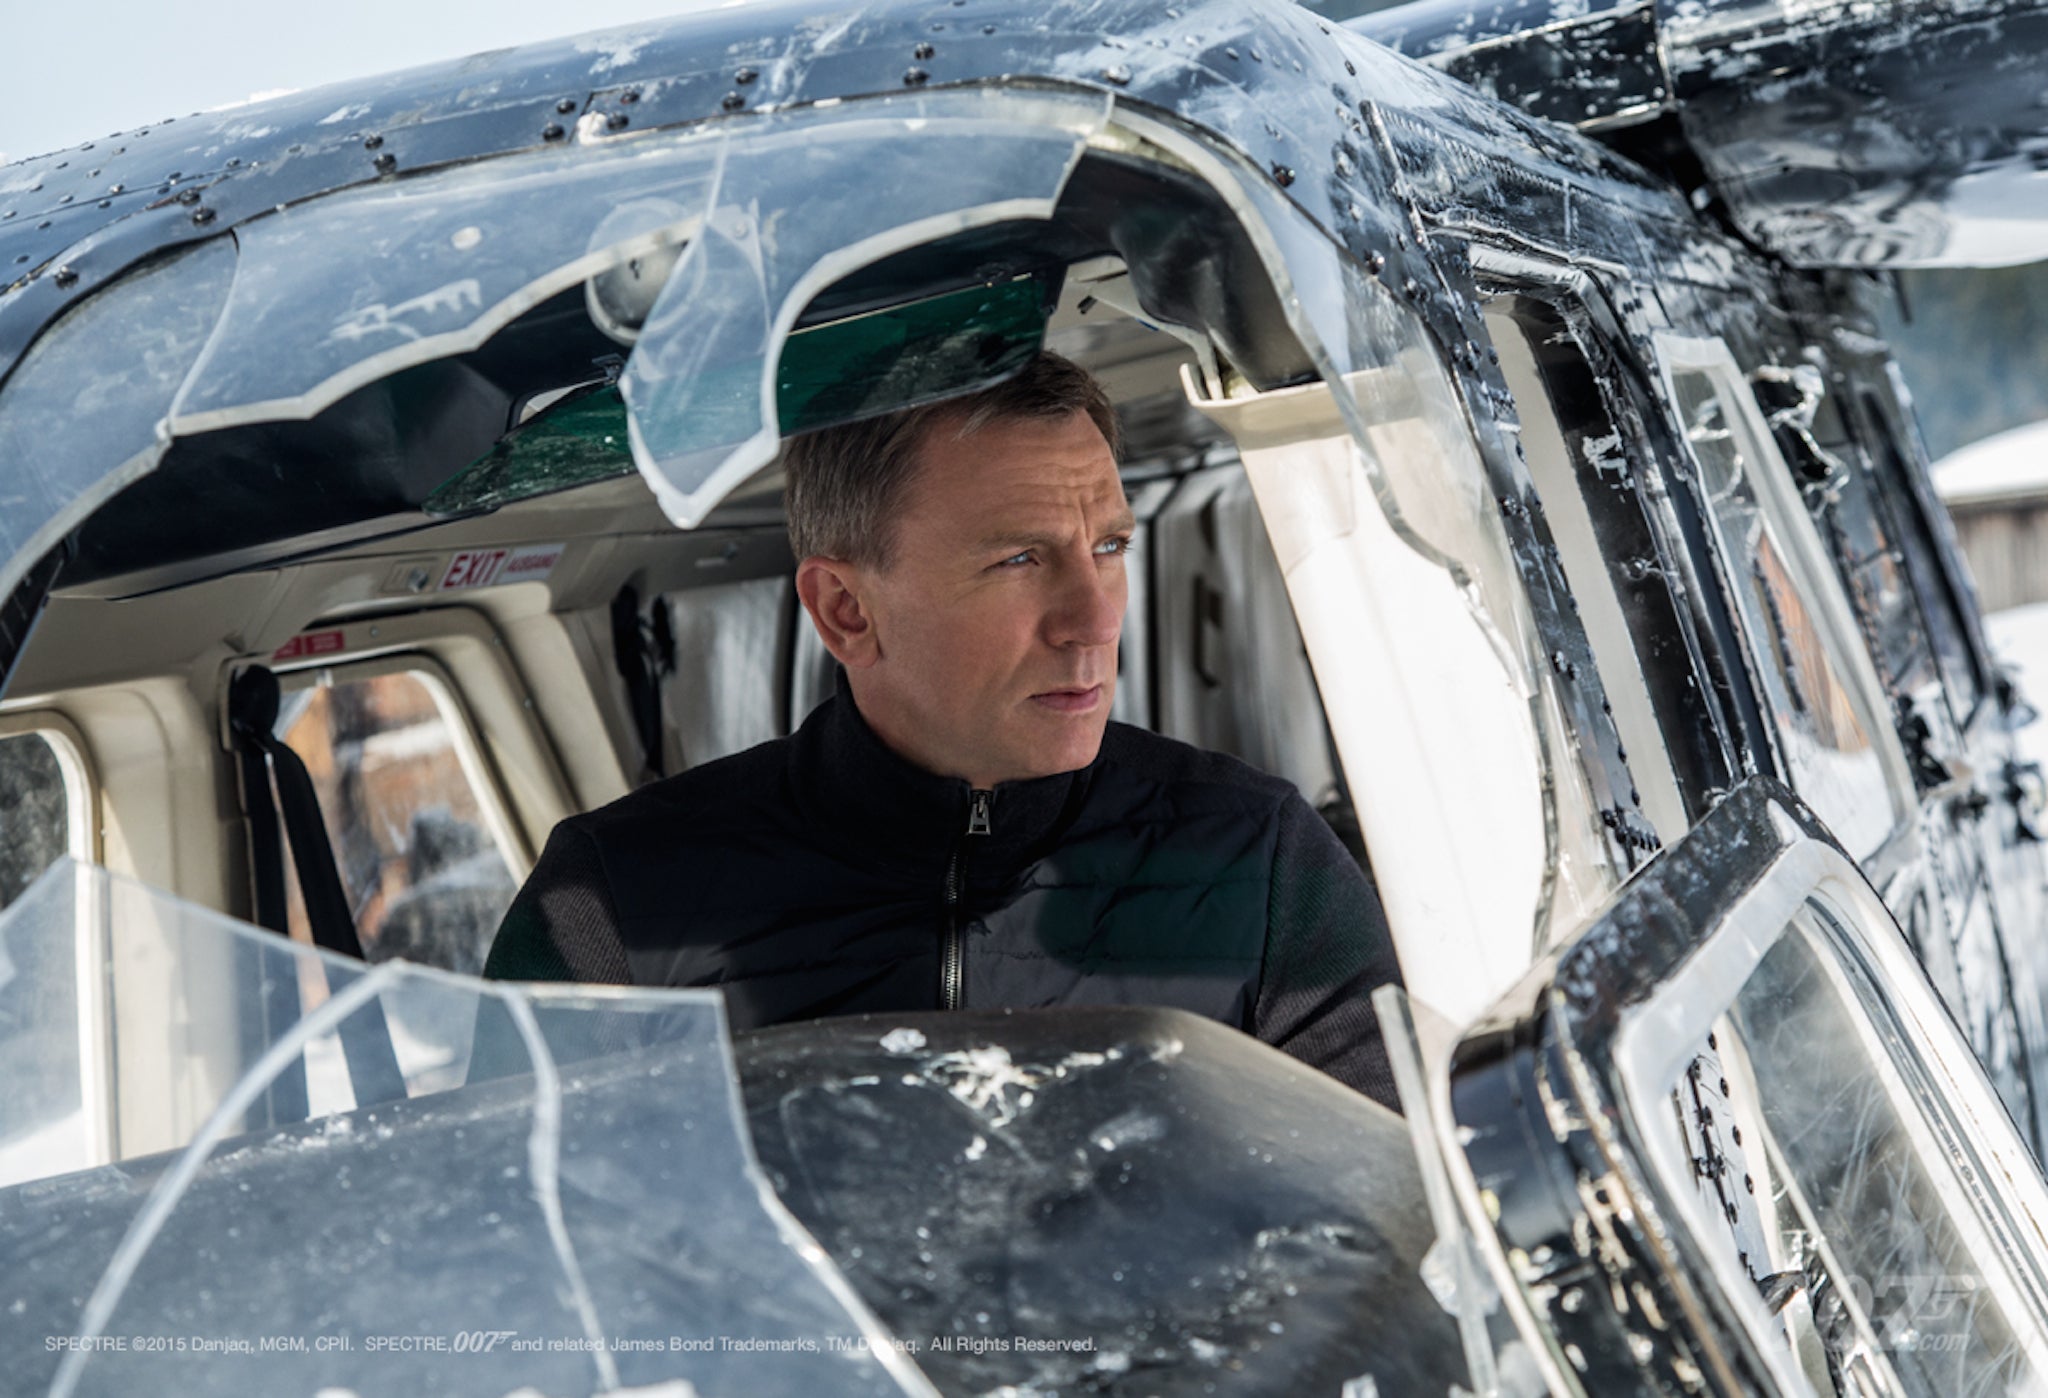 Daniel Craig reprises his role as James Bond for the fourth time in Spectre